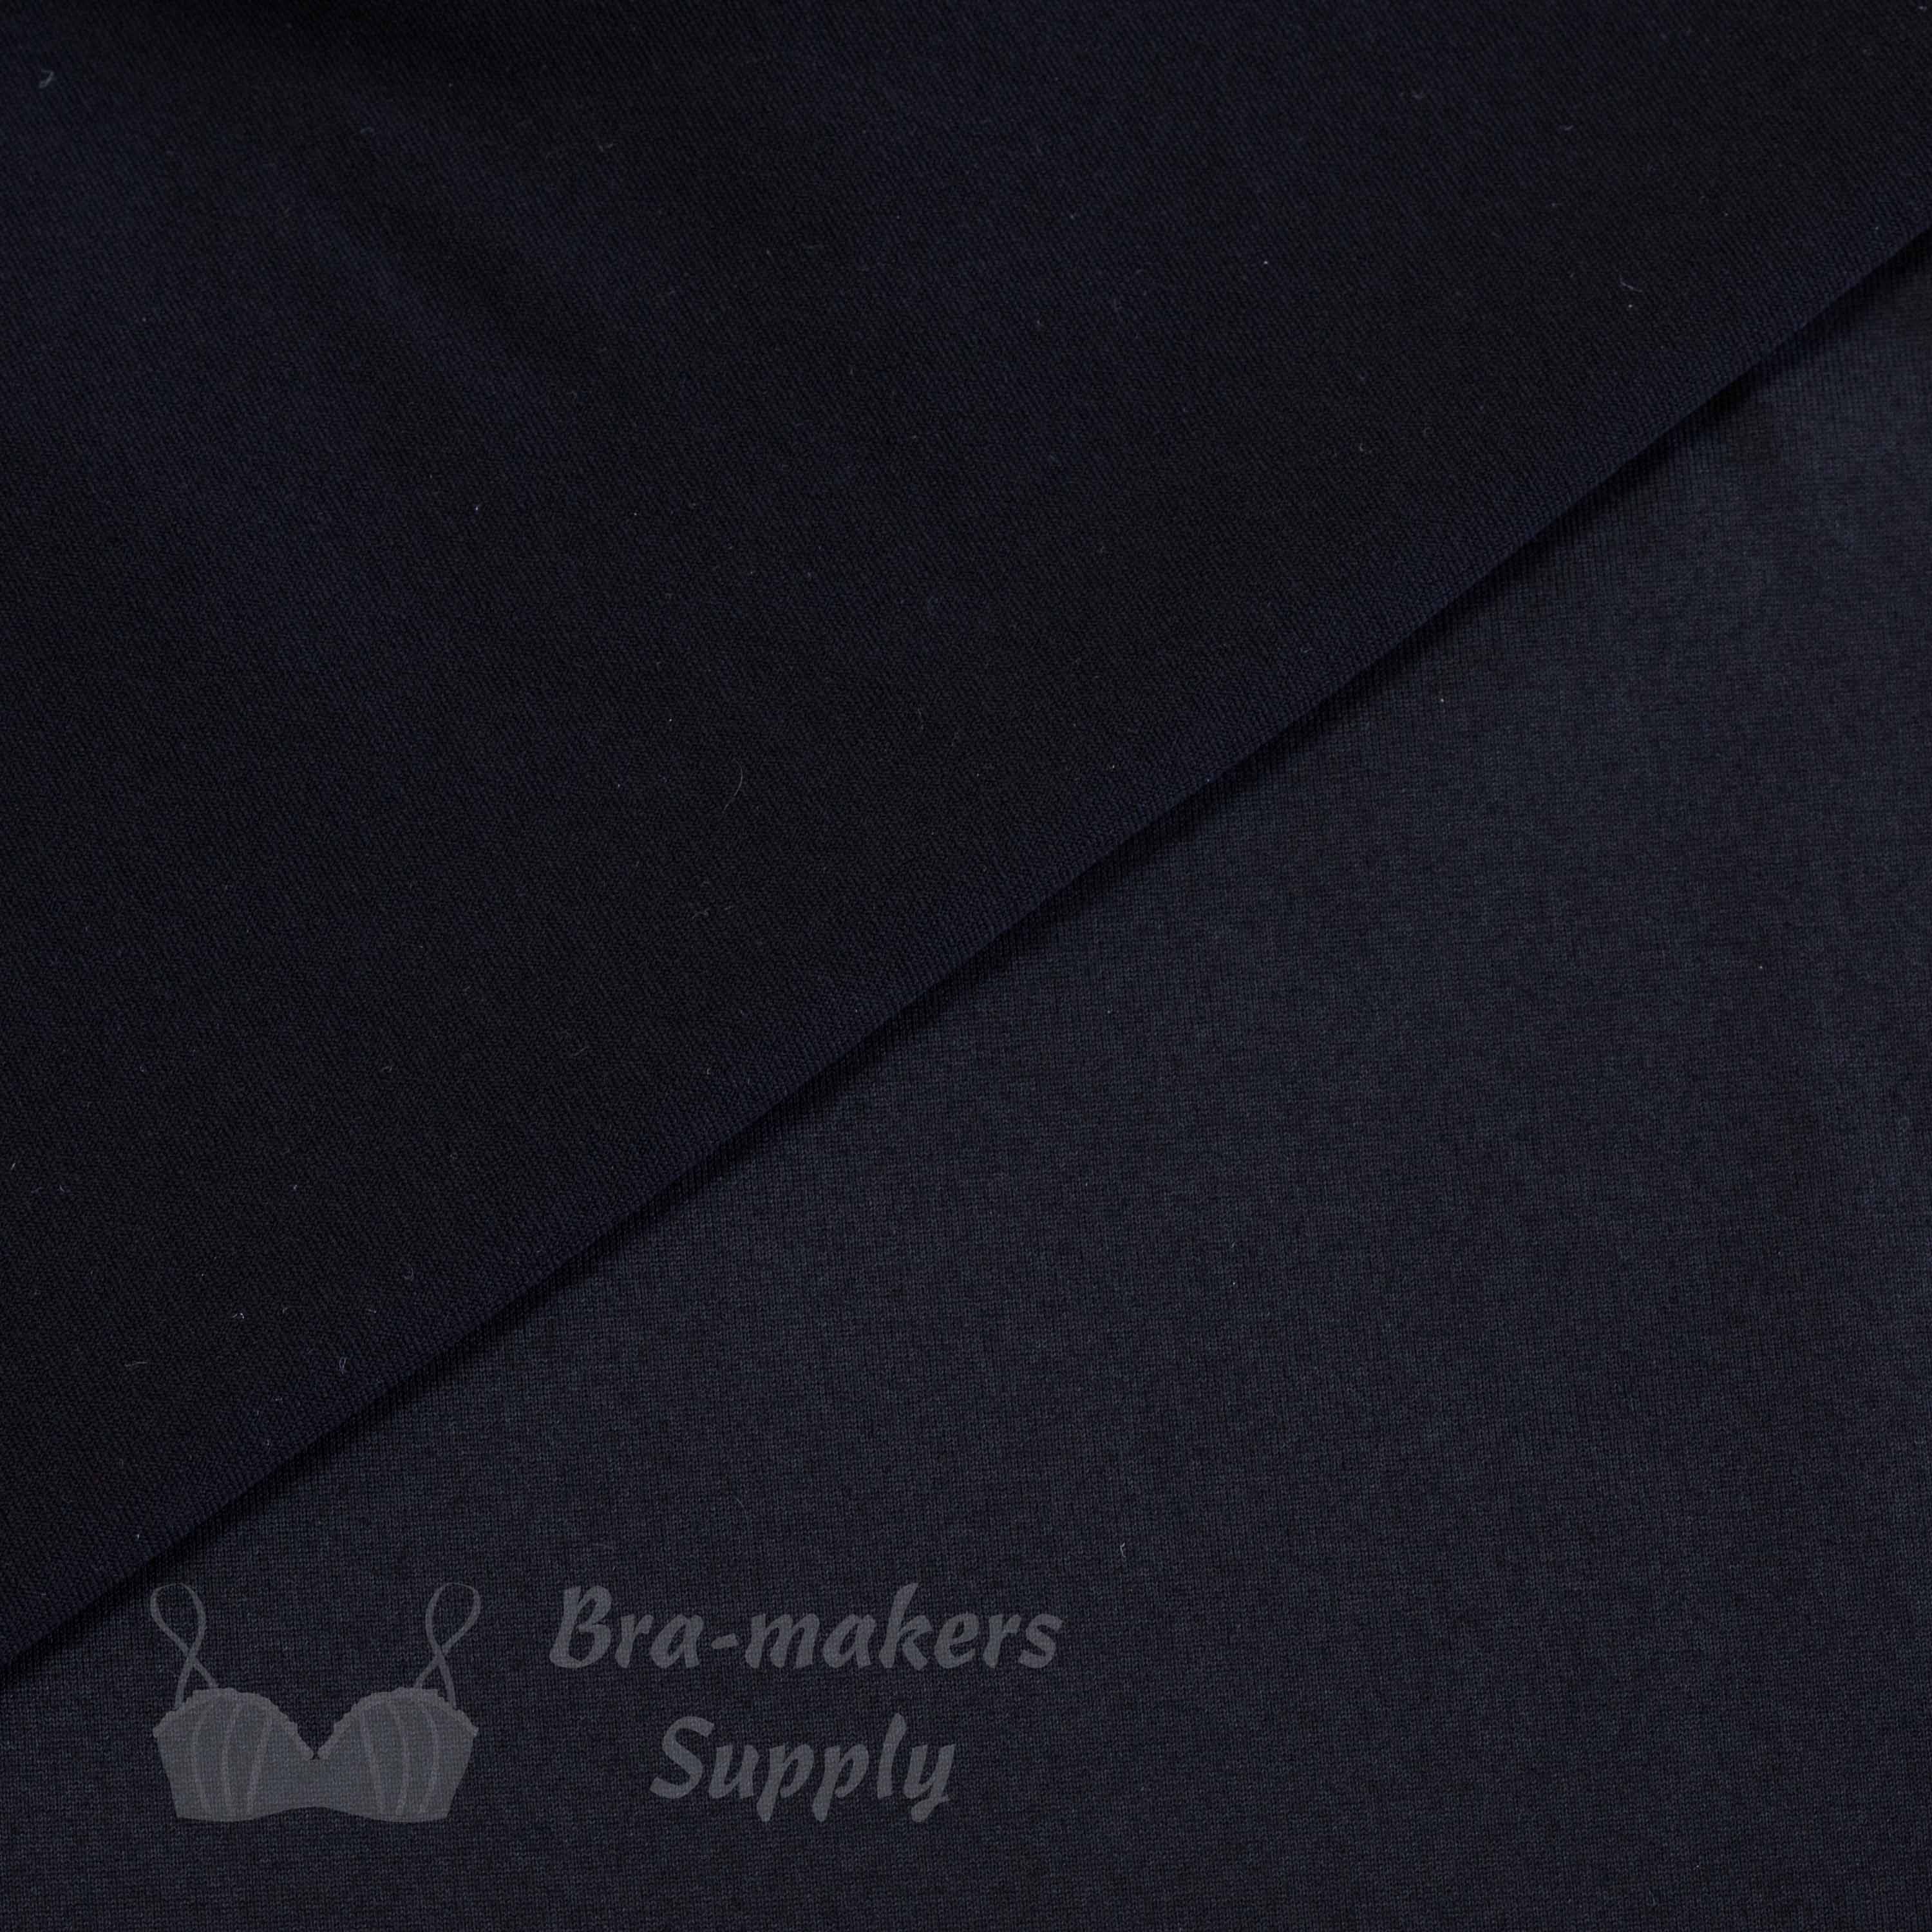 supplex active wear stretch fabric FT-48 black from Bra-Makers Supply Hamilton folded shown